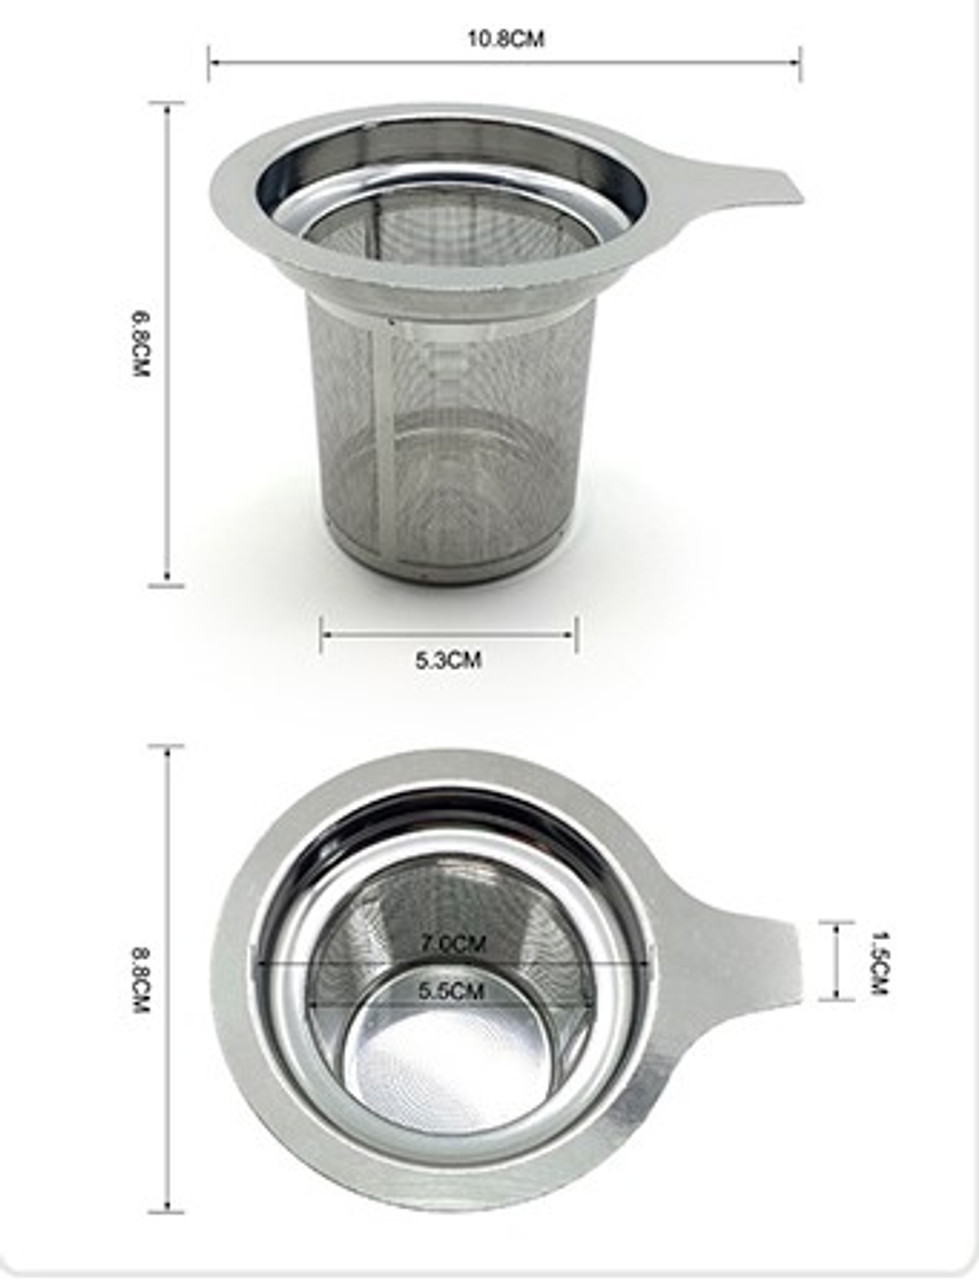 Stainless Steel Tea Strainer - Discount Coffee